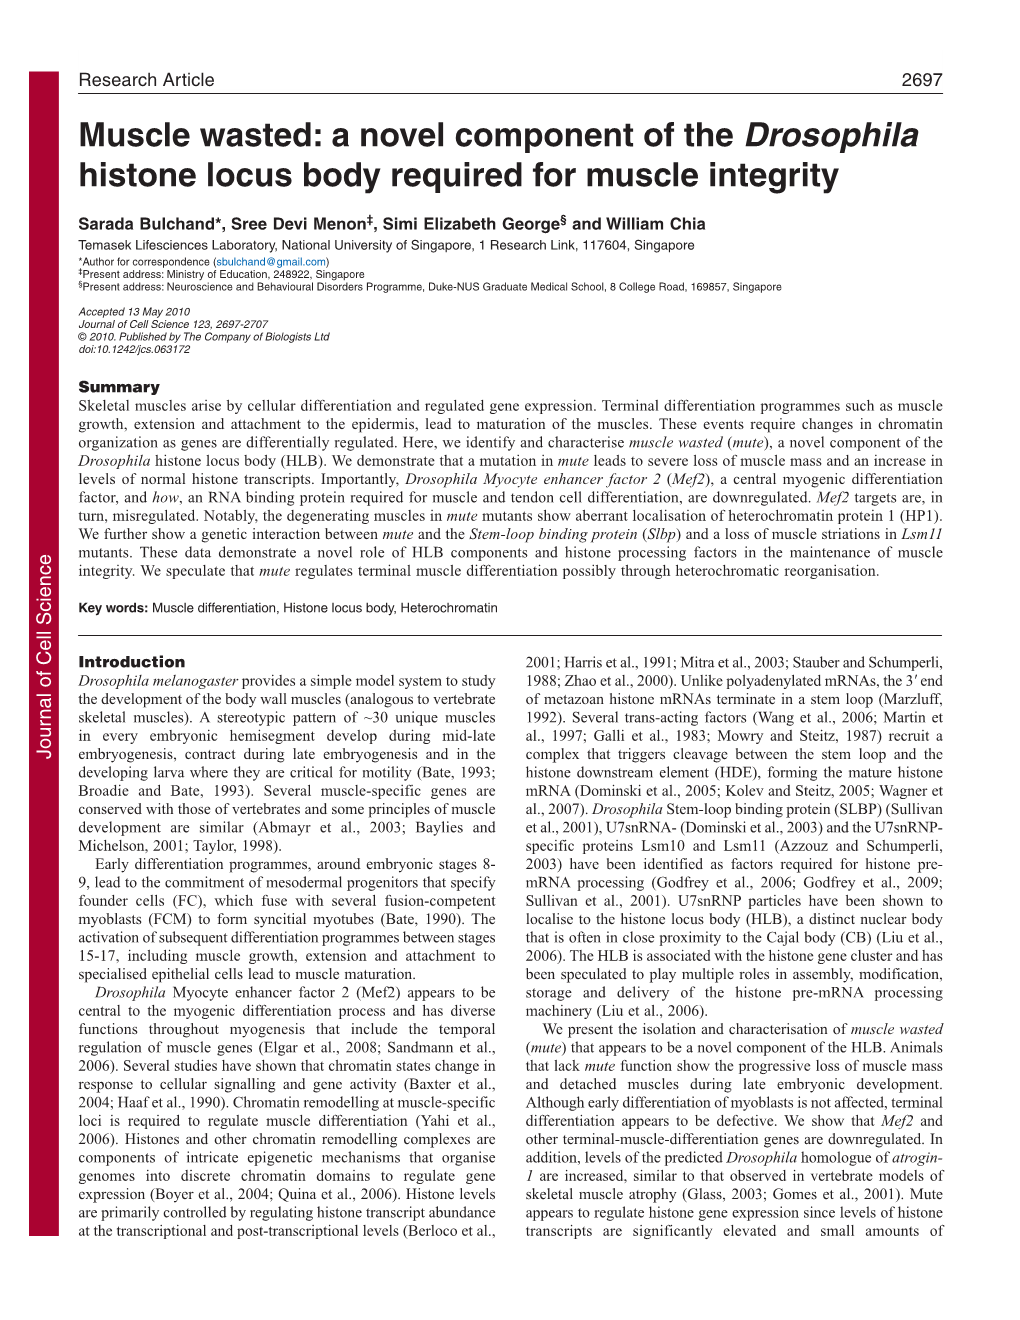 A Novel Component of the Drosophila Histone Locus Body Required for Muscle Integrity